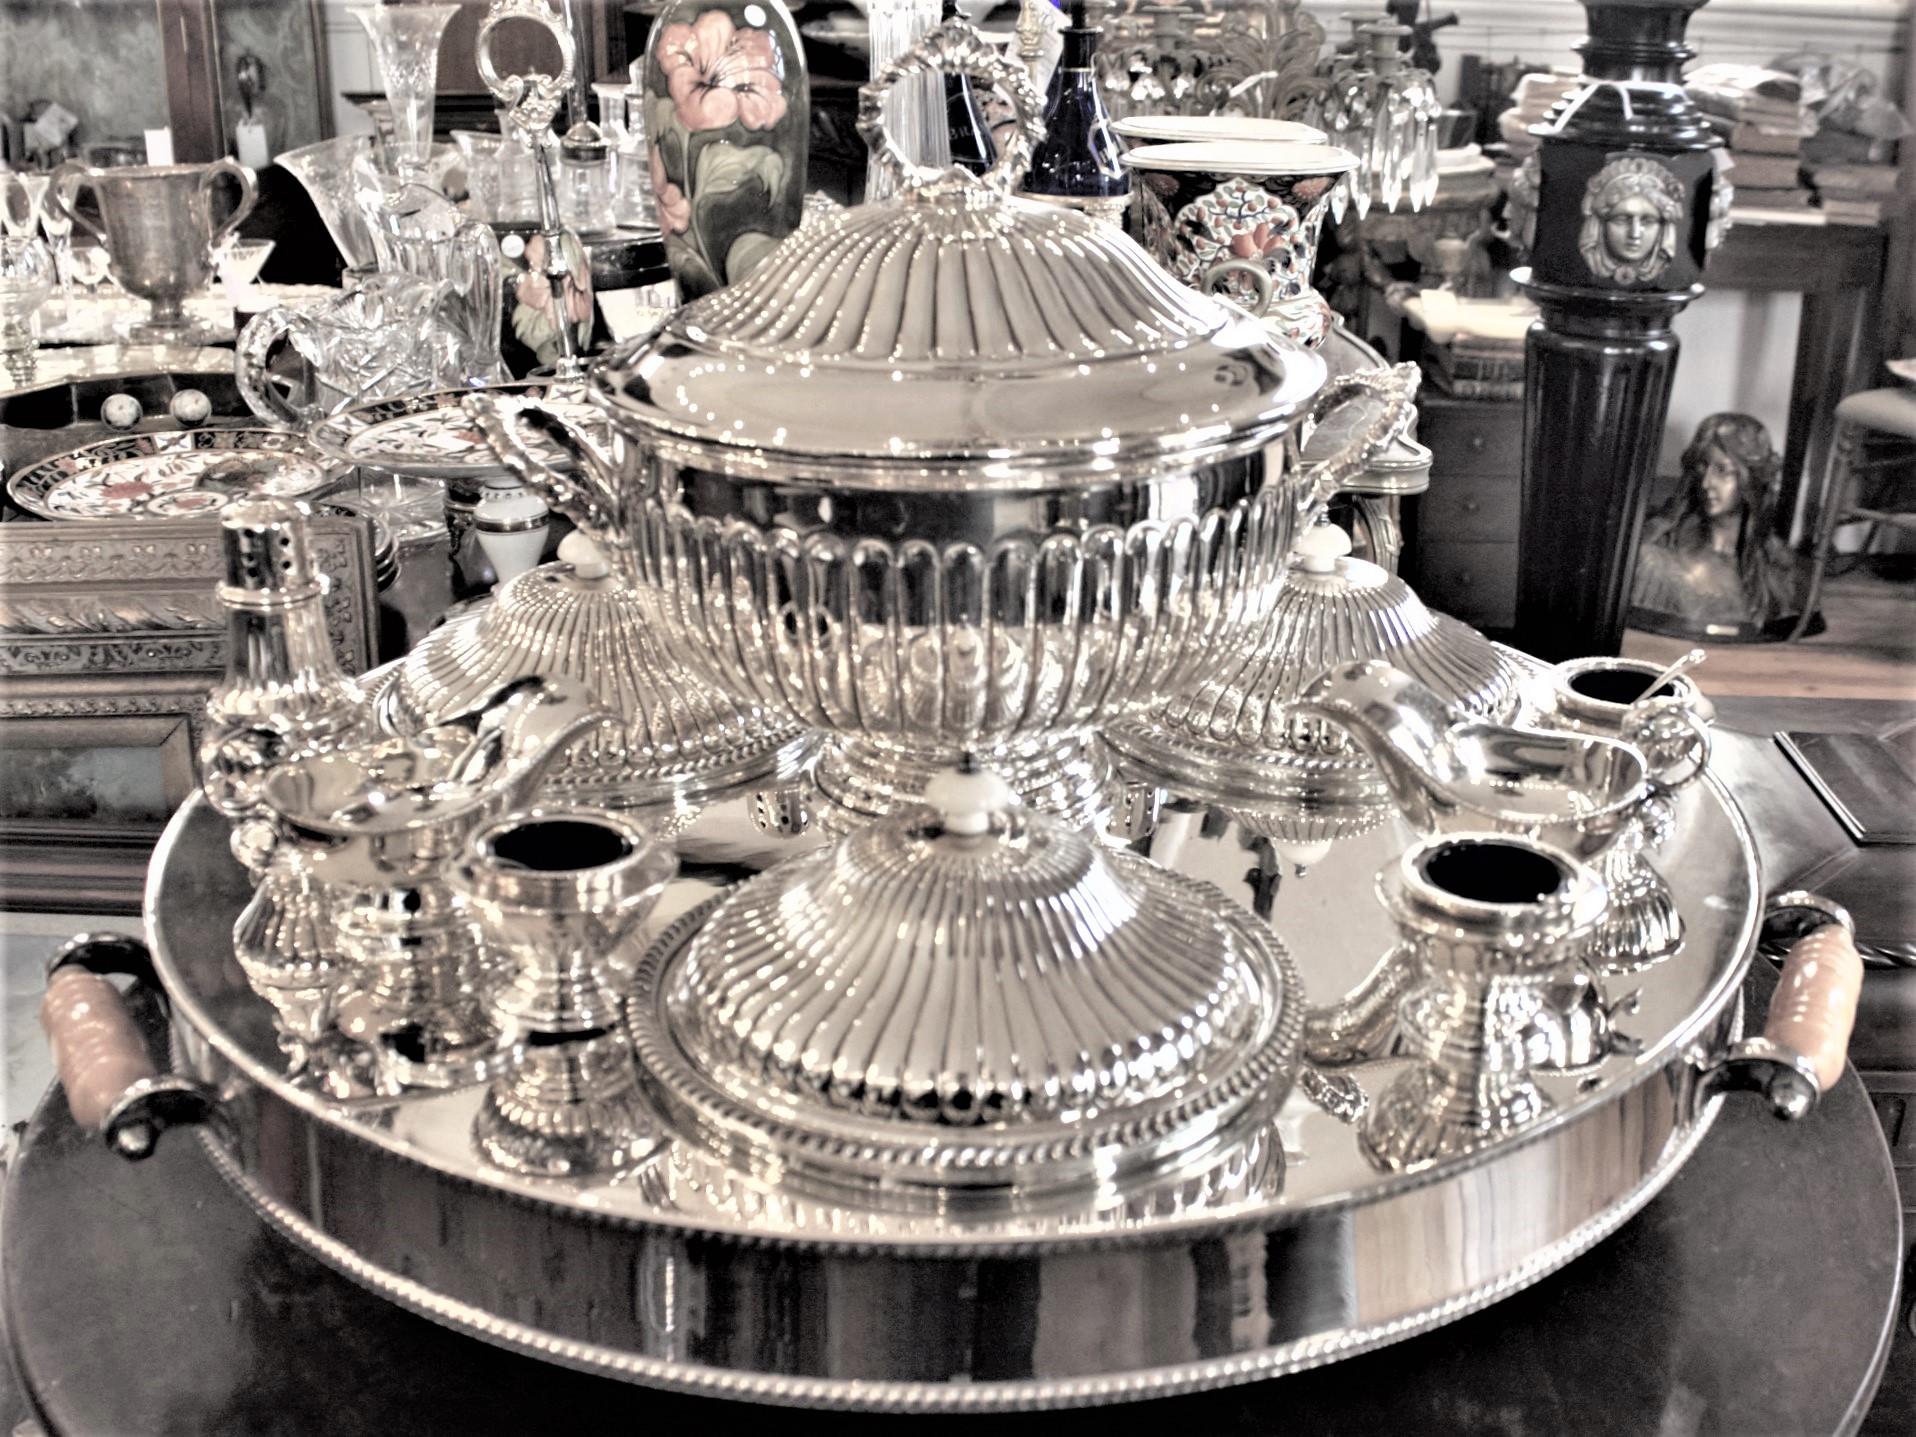 This very large and substantial antique silver plated carousel or 'Lazy Susan' server was made in Sheffield England in circa 1920 in a slightly earlier Edwardian style. The base is a very heavy silver plated hot water tank with a large drain plug